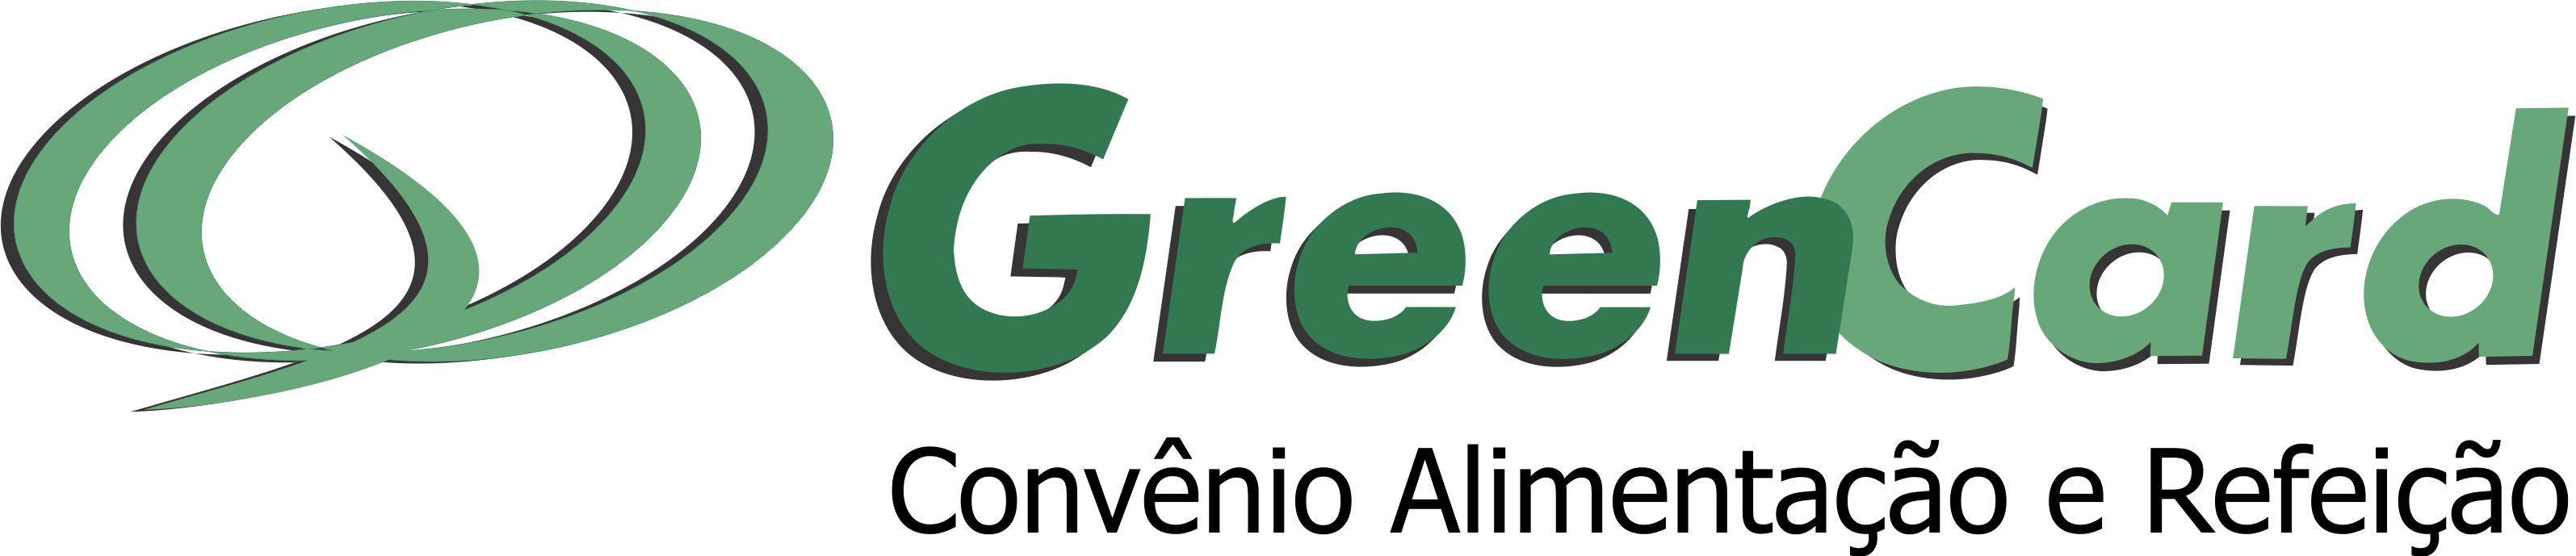 Green Card PNG Image HQ